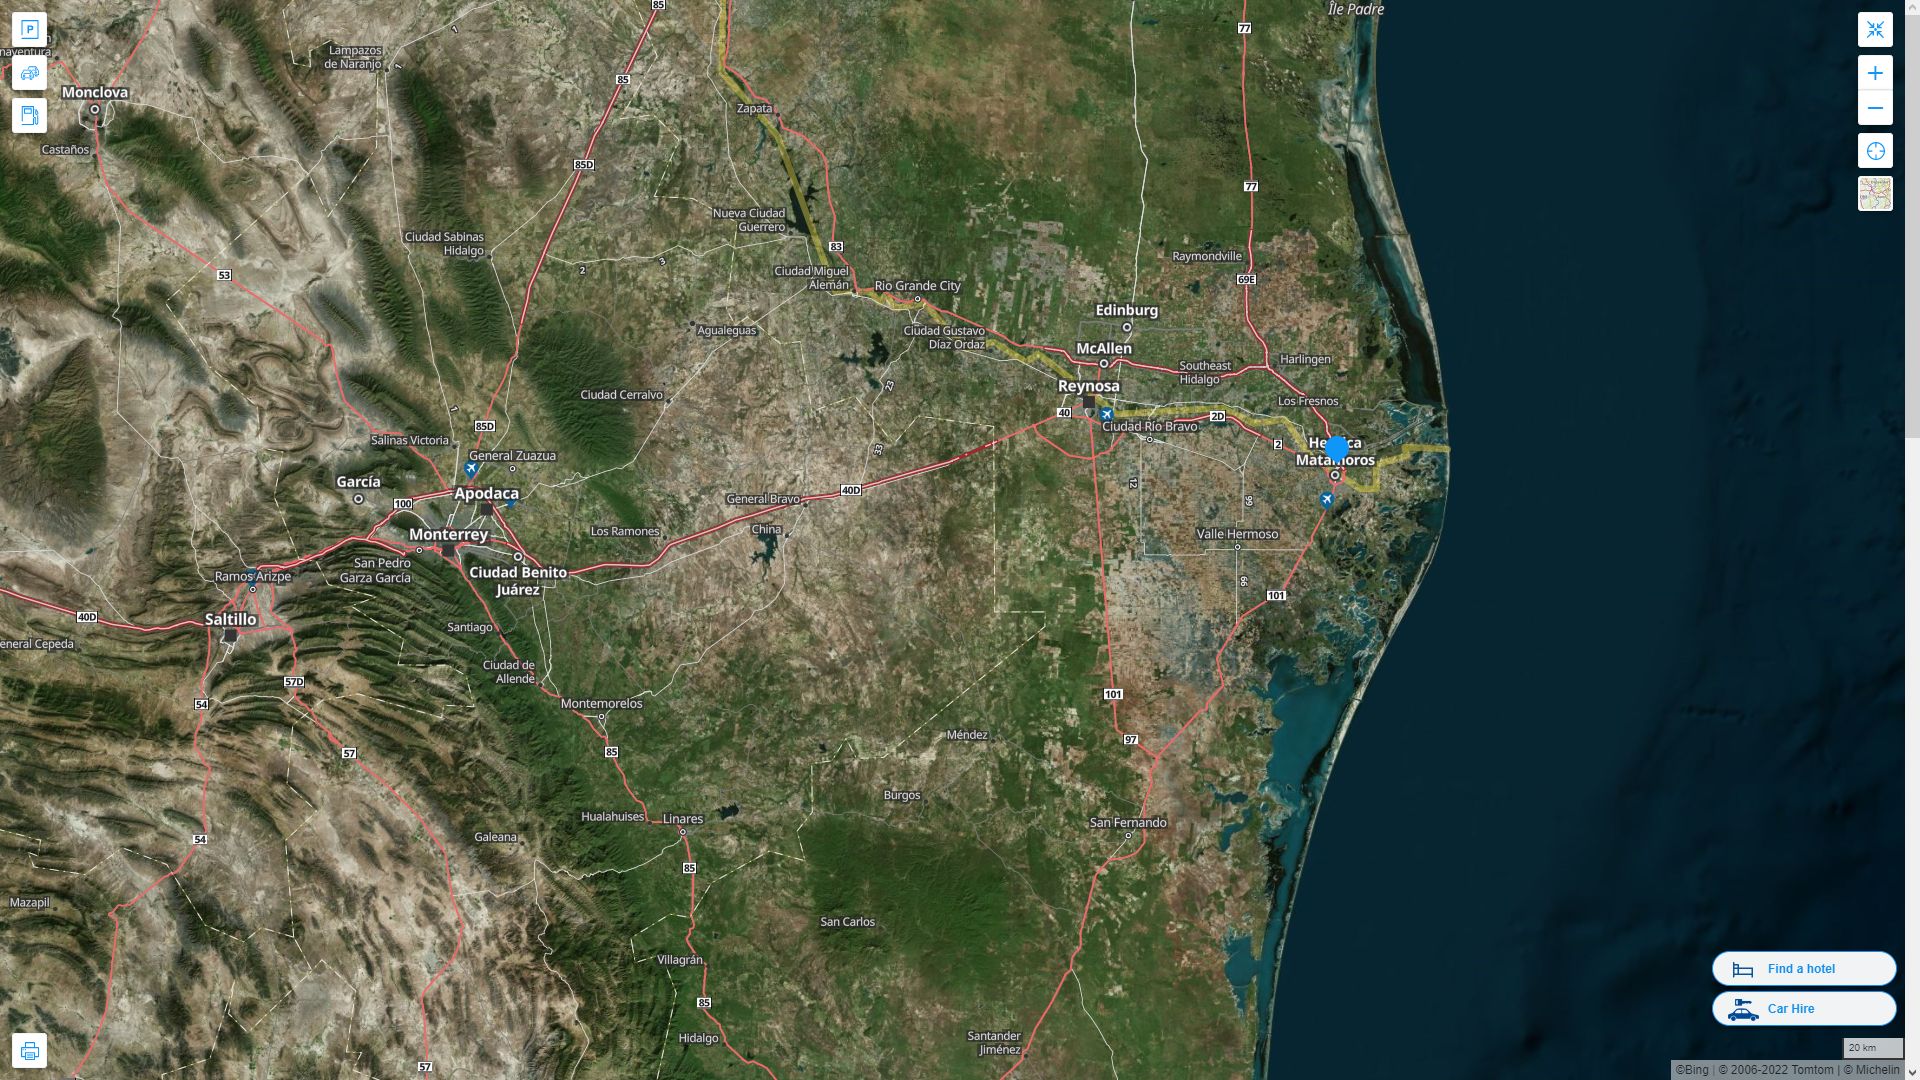 Brownsville Texas Highway and Road Map with Satellite View